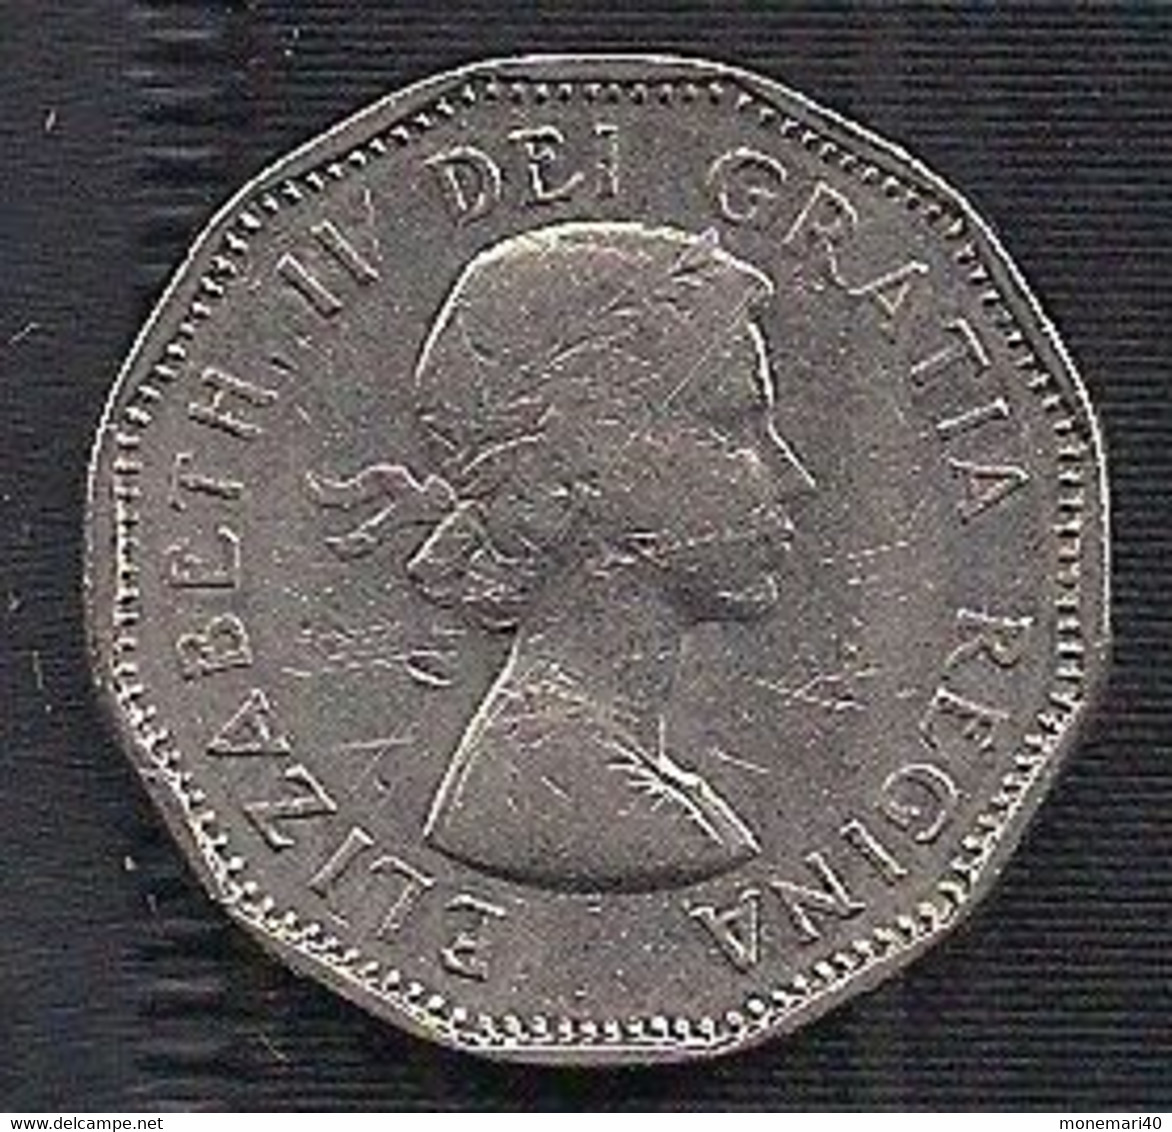 CANADA 5 CENTS - 1960 - German East Africa